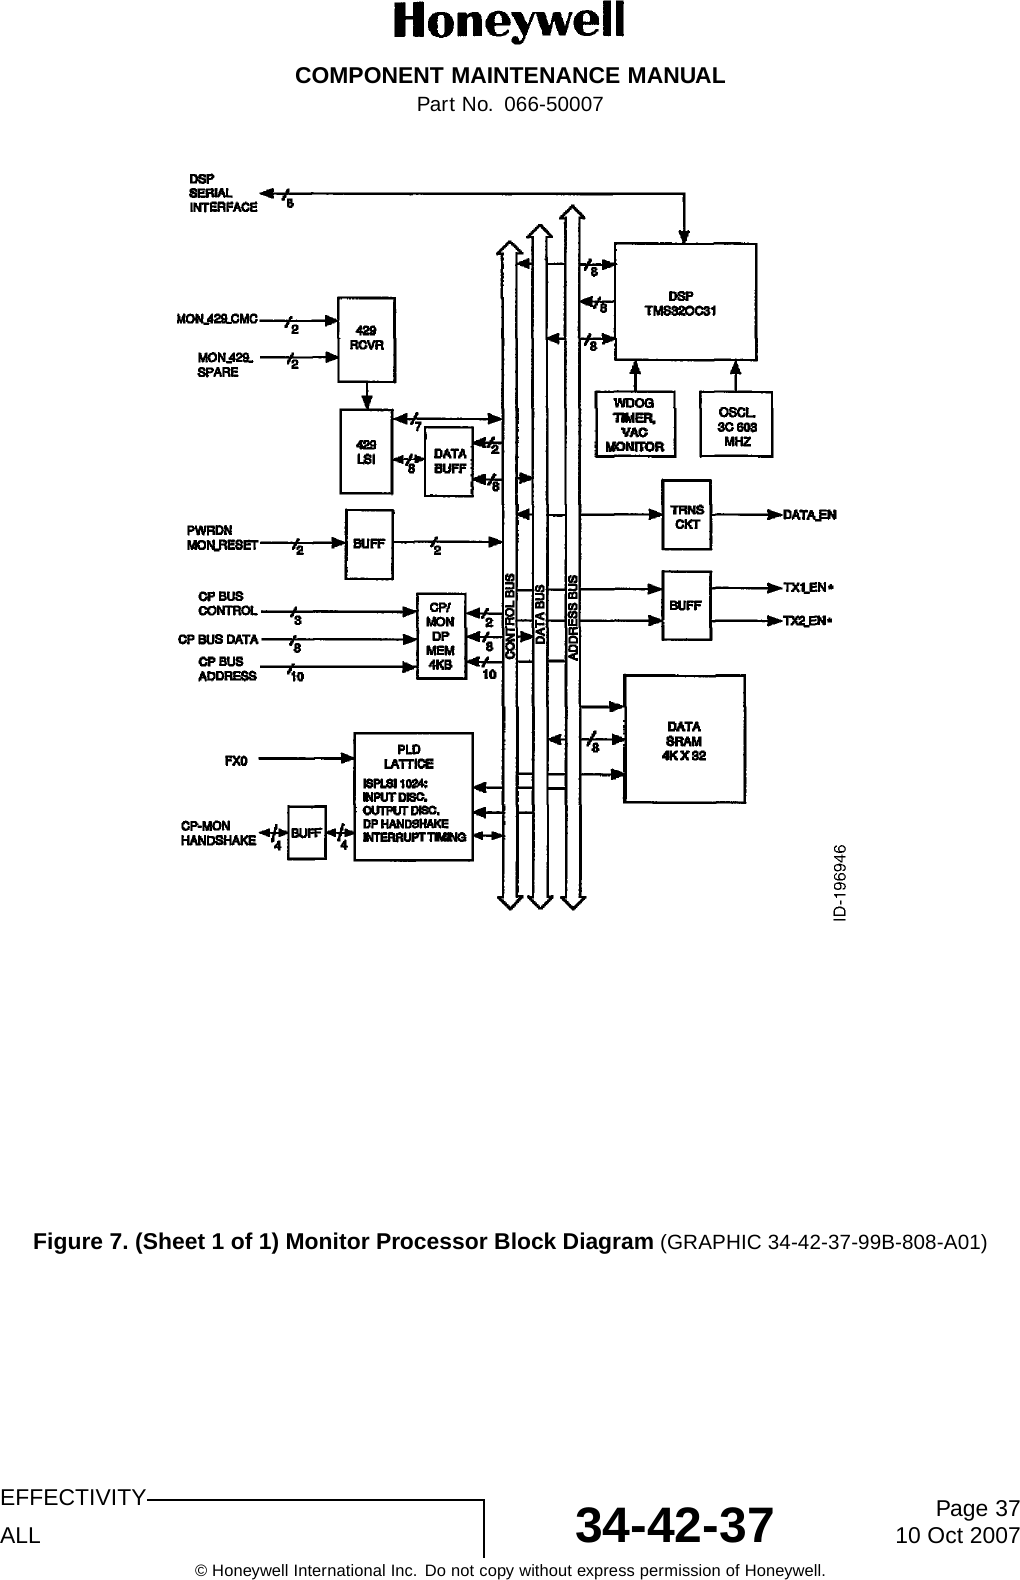 COMPONENT MAINTENANCE MANUALPart No. 066-50007Figure 7. (Sheet 1 of 1) Monitor Processor Block Diagram (GRAPHIC 34-42-37-99B-808-A01)EFFECTIVITYALL 34-42-37 Page 3710 Oct 2007© Honeywell International Inc. Do not copy without express permission of Honeywell.